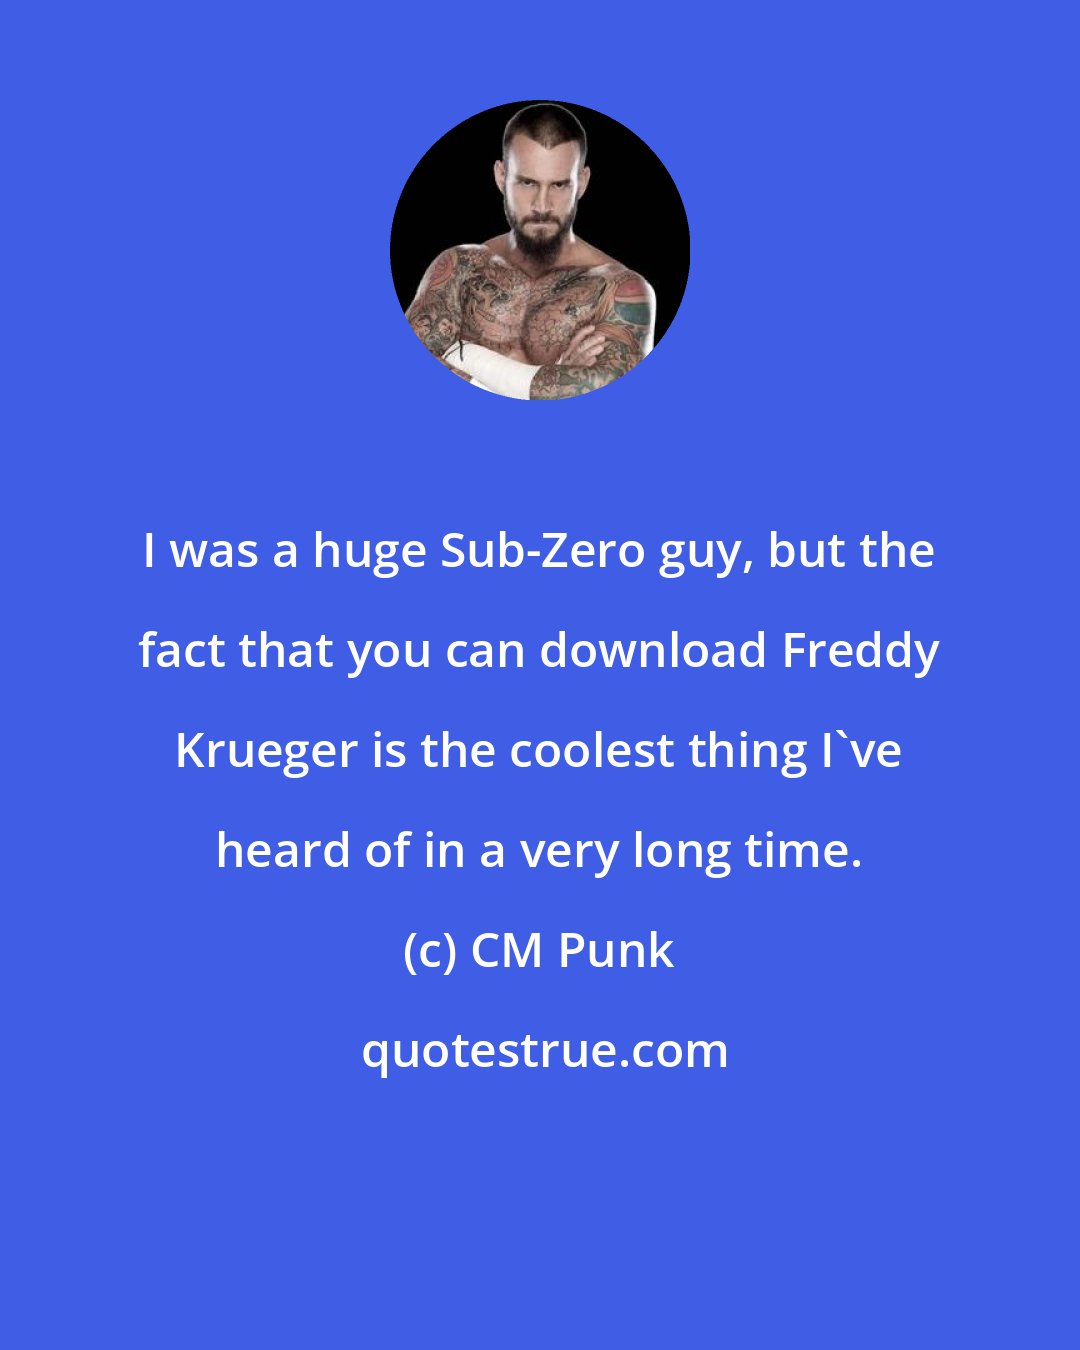 CM Punk: I was a huge Sub-Zero guy, but the fact that you can download Freddy Krueger is the coolest thing I've heard of in a very long time.